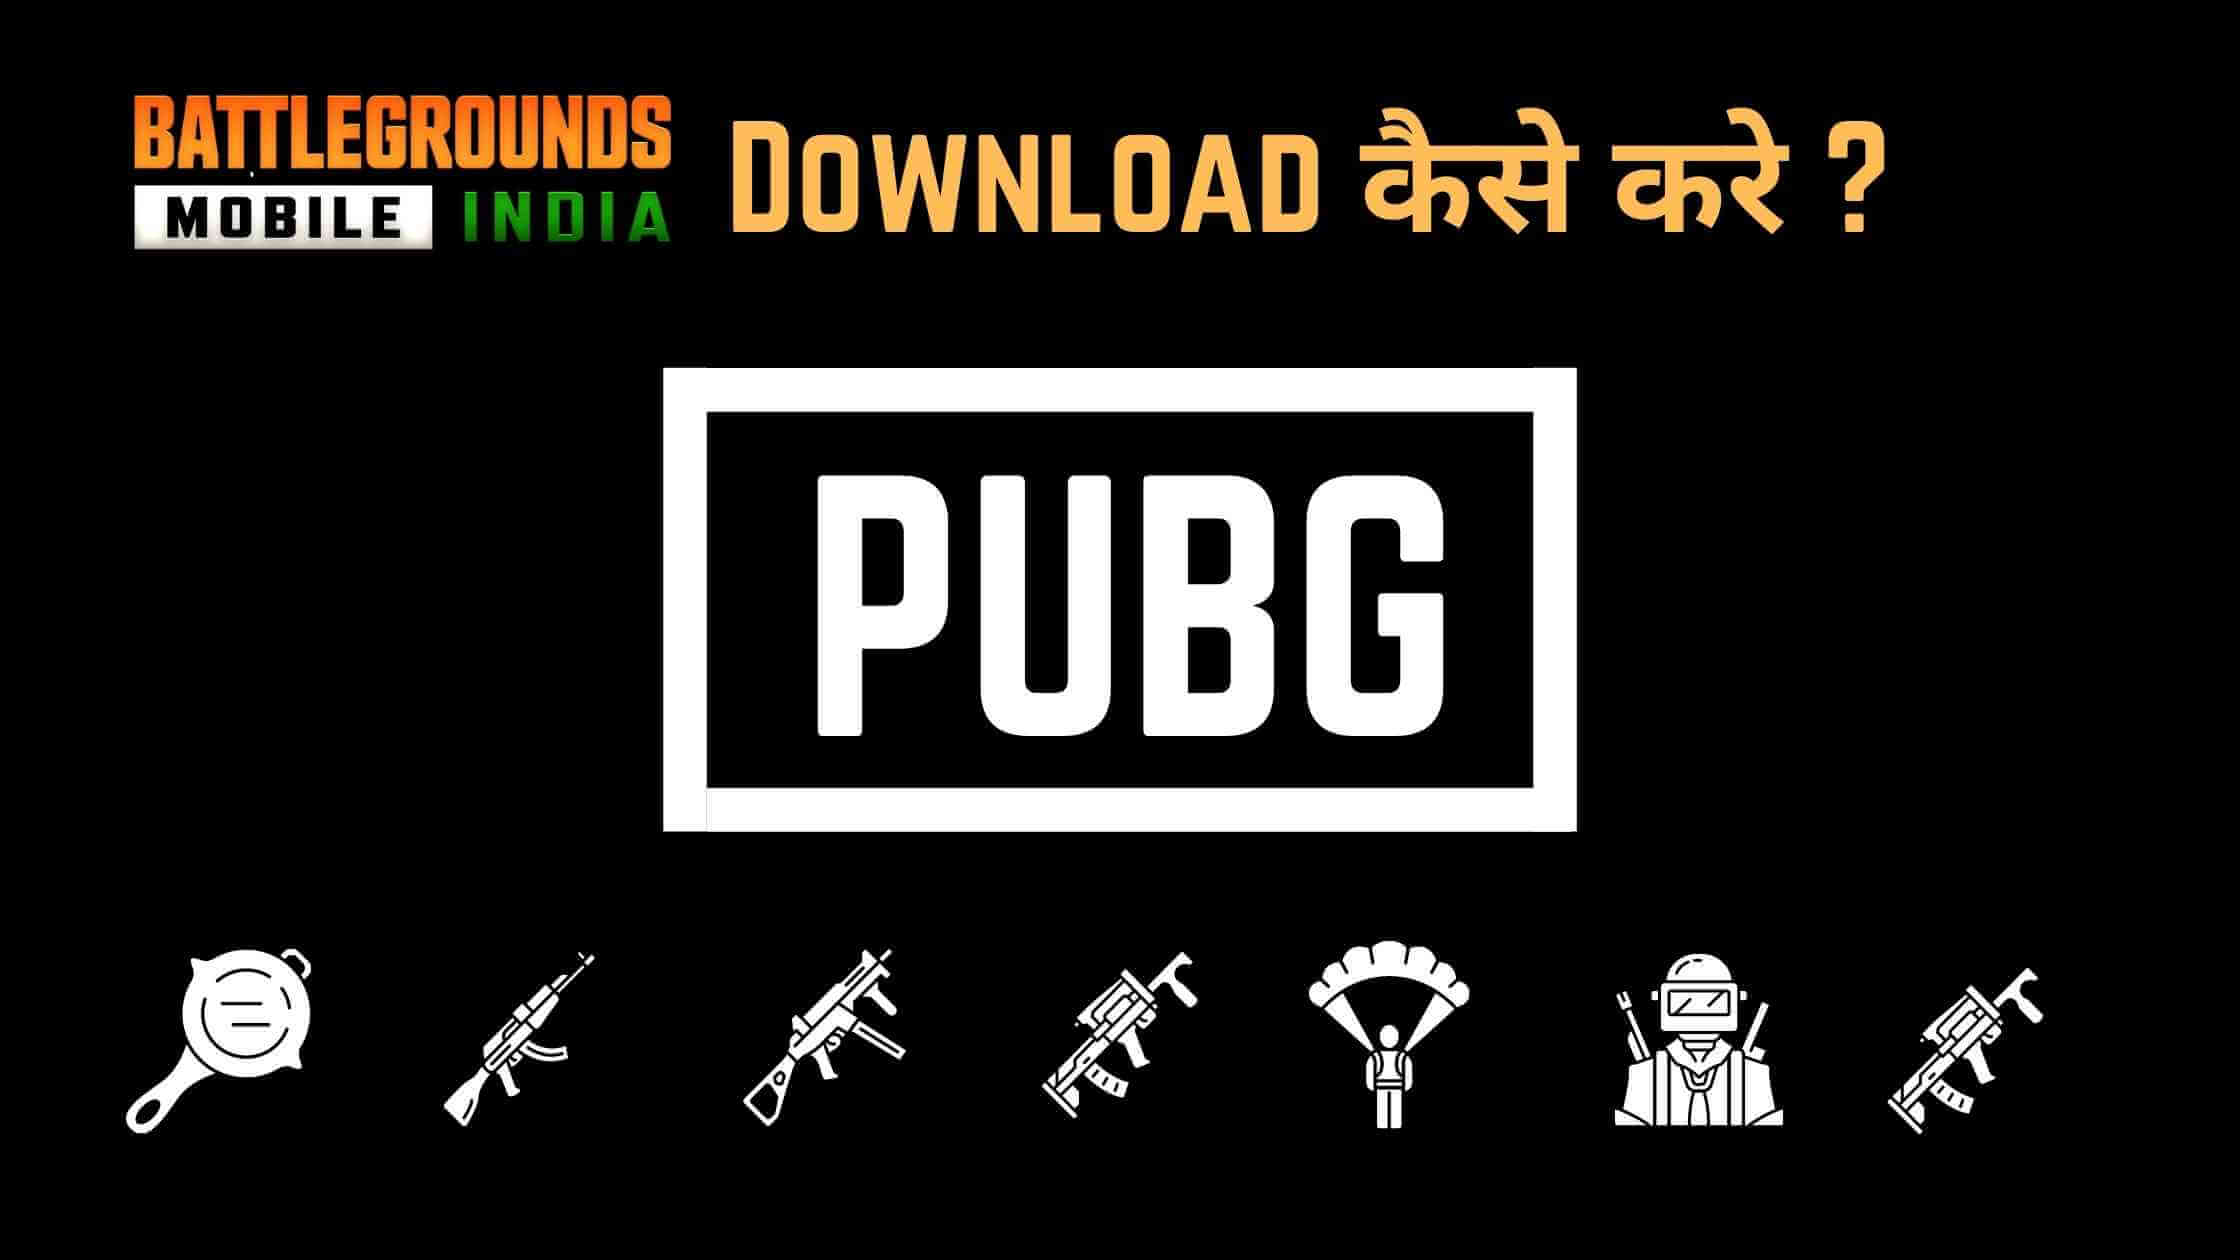 pubg mobile india download kaise kare